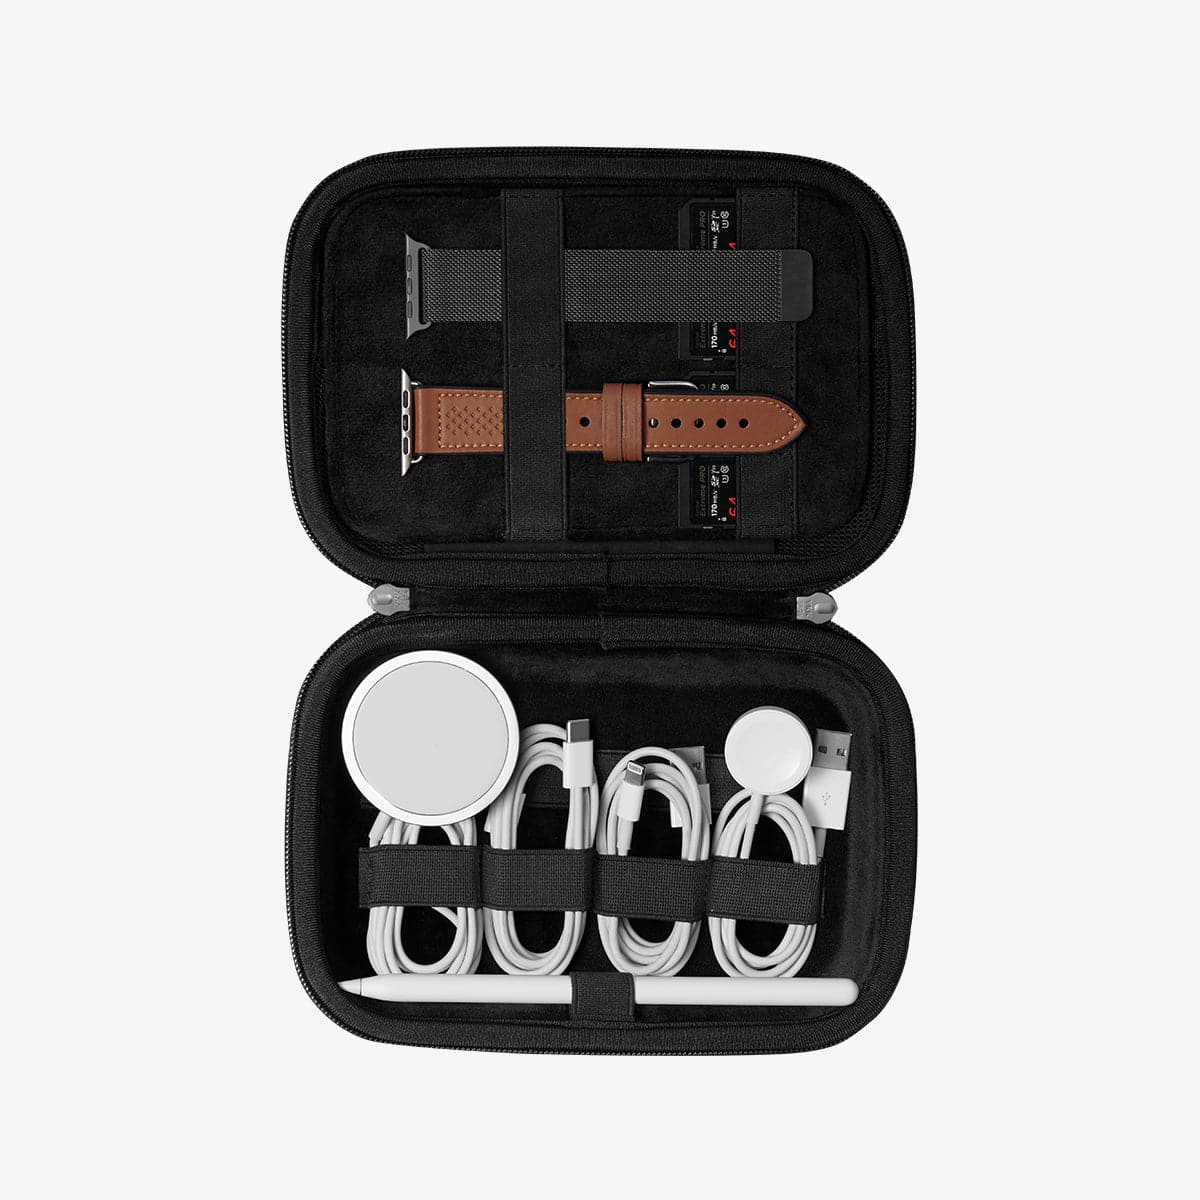 AFA04536 - Rugged Armor® Pro Cable Organizer Bag in black showing the inside with cables, stylus pen and watch bands organized within straps